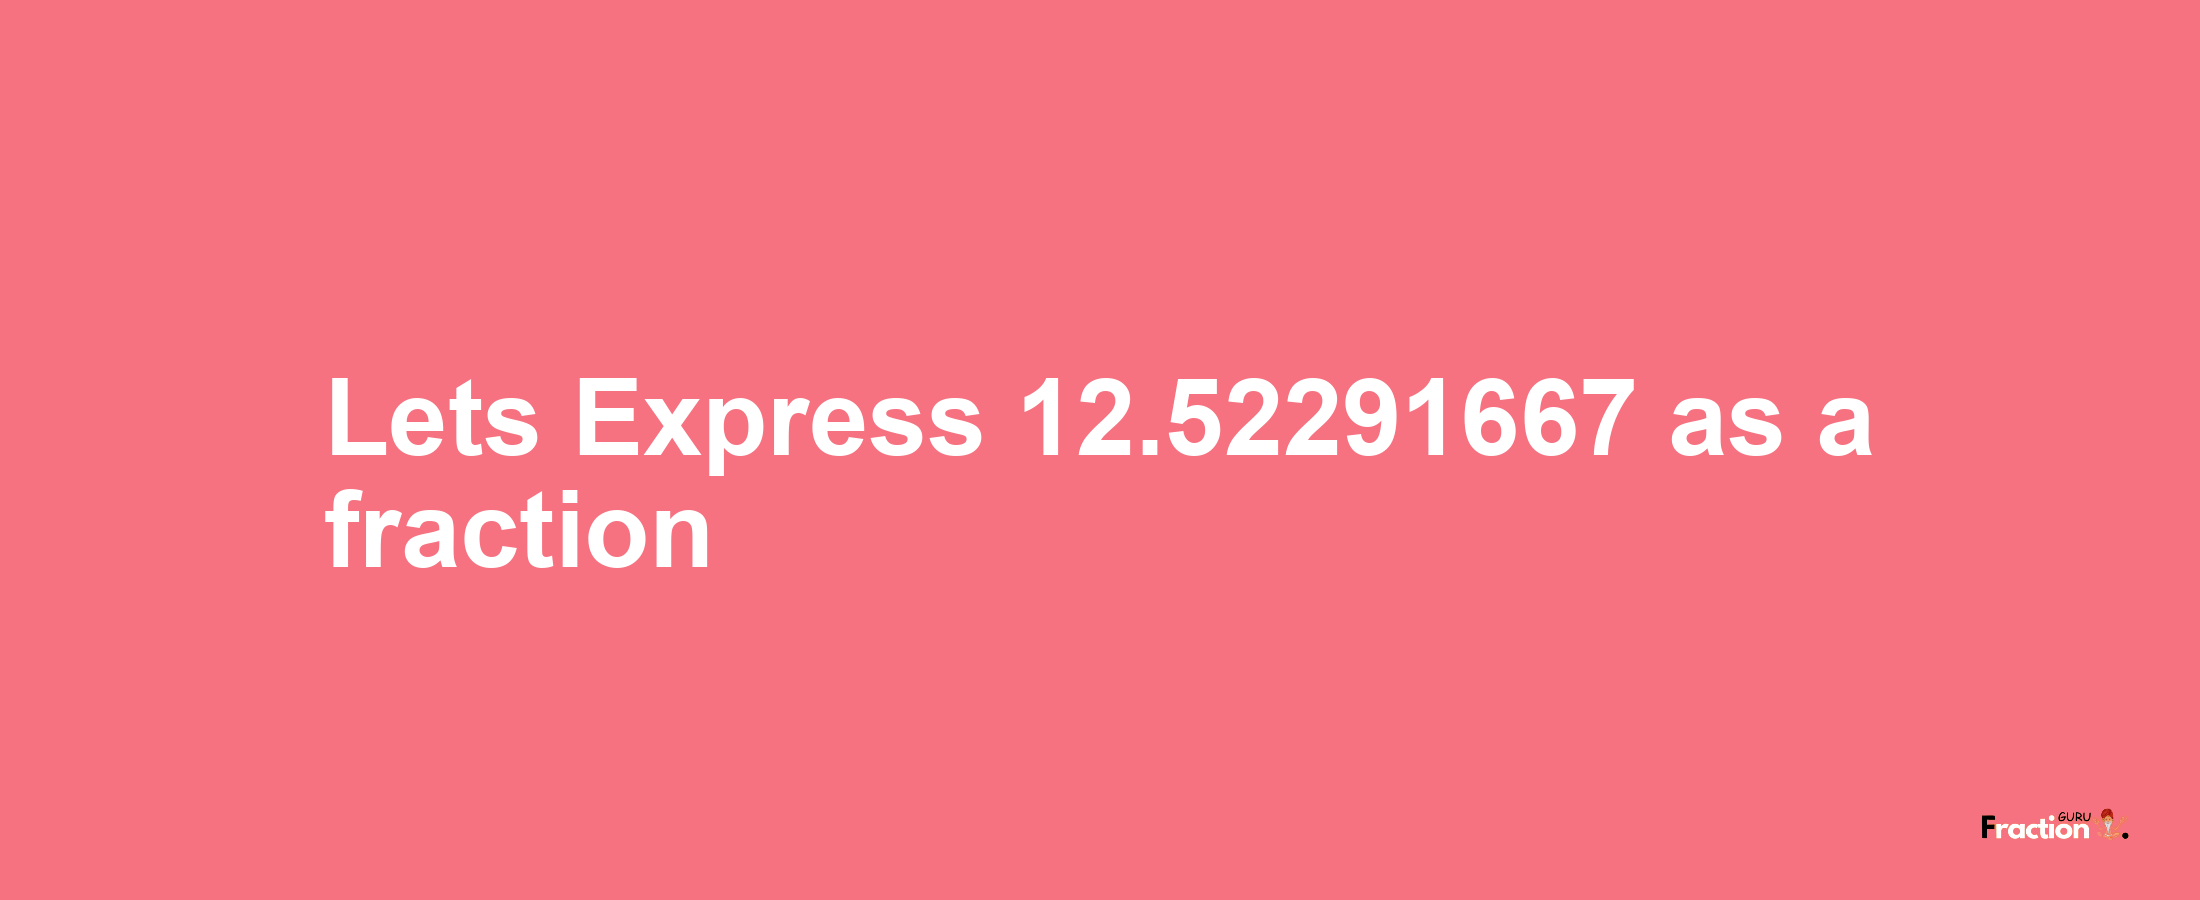 Lets Express 12.52291667 as afraction